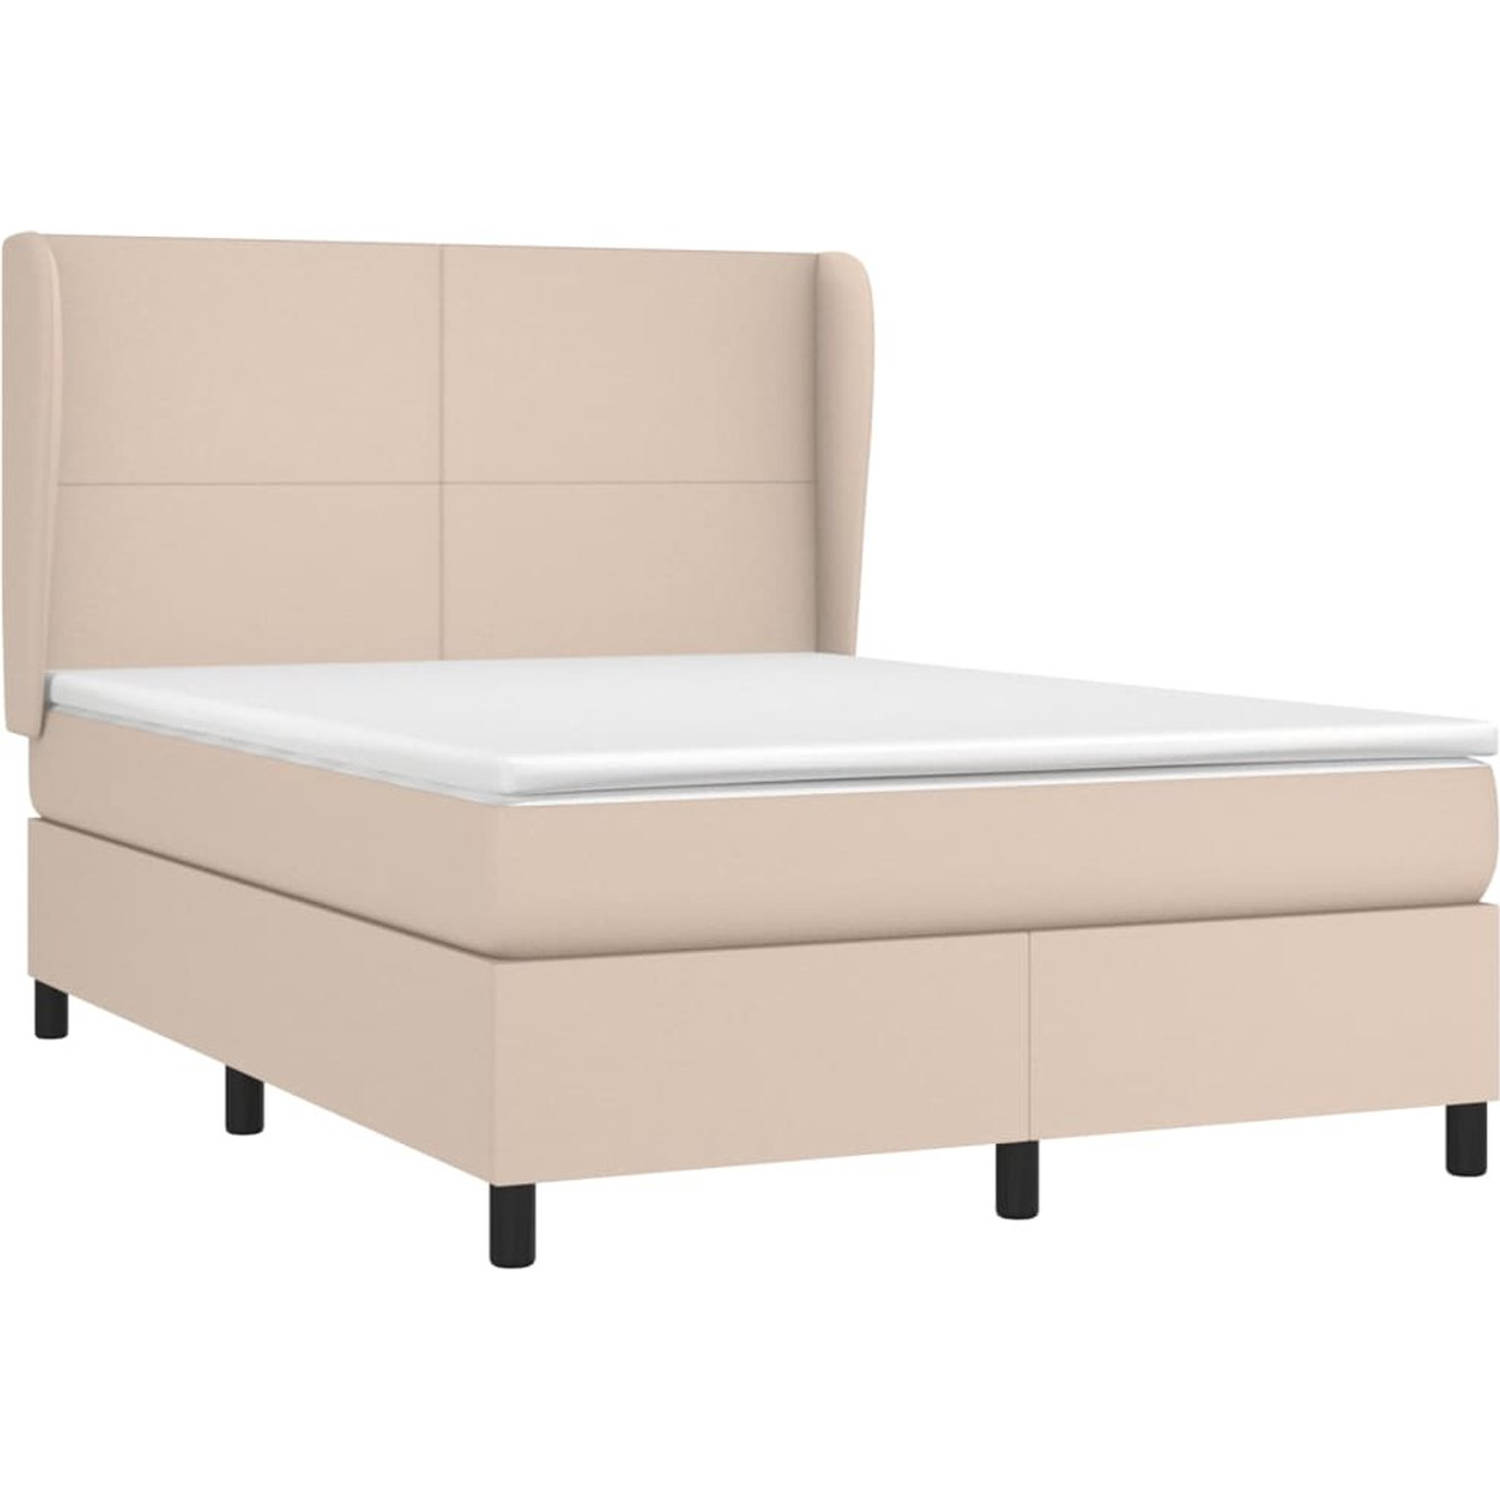 The Living Store Boxspringbed s - Bed - 203x147x118/128cm - Kunstleer - Pocketvering